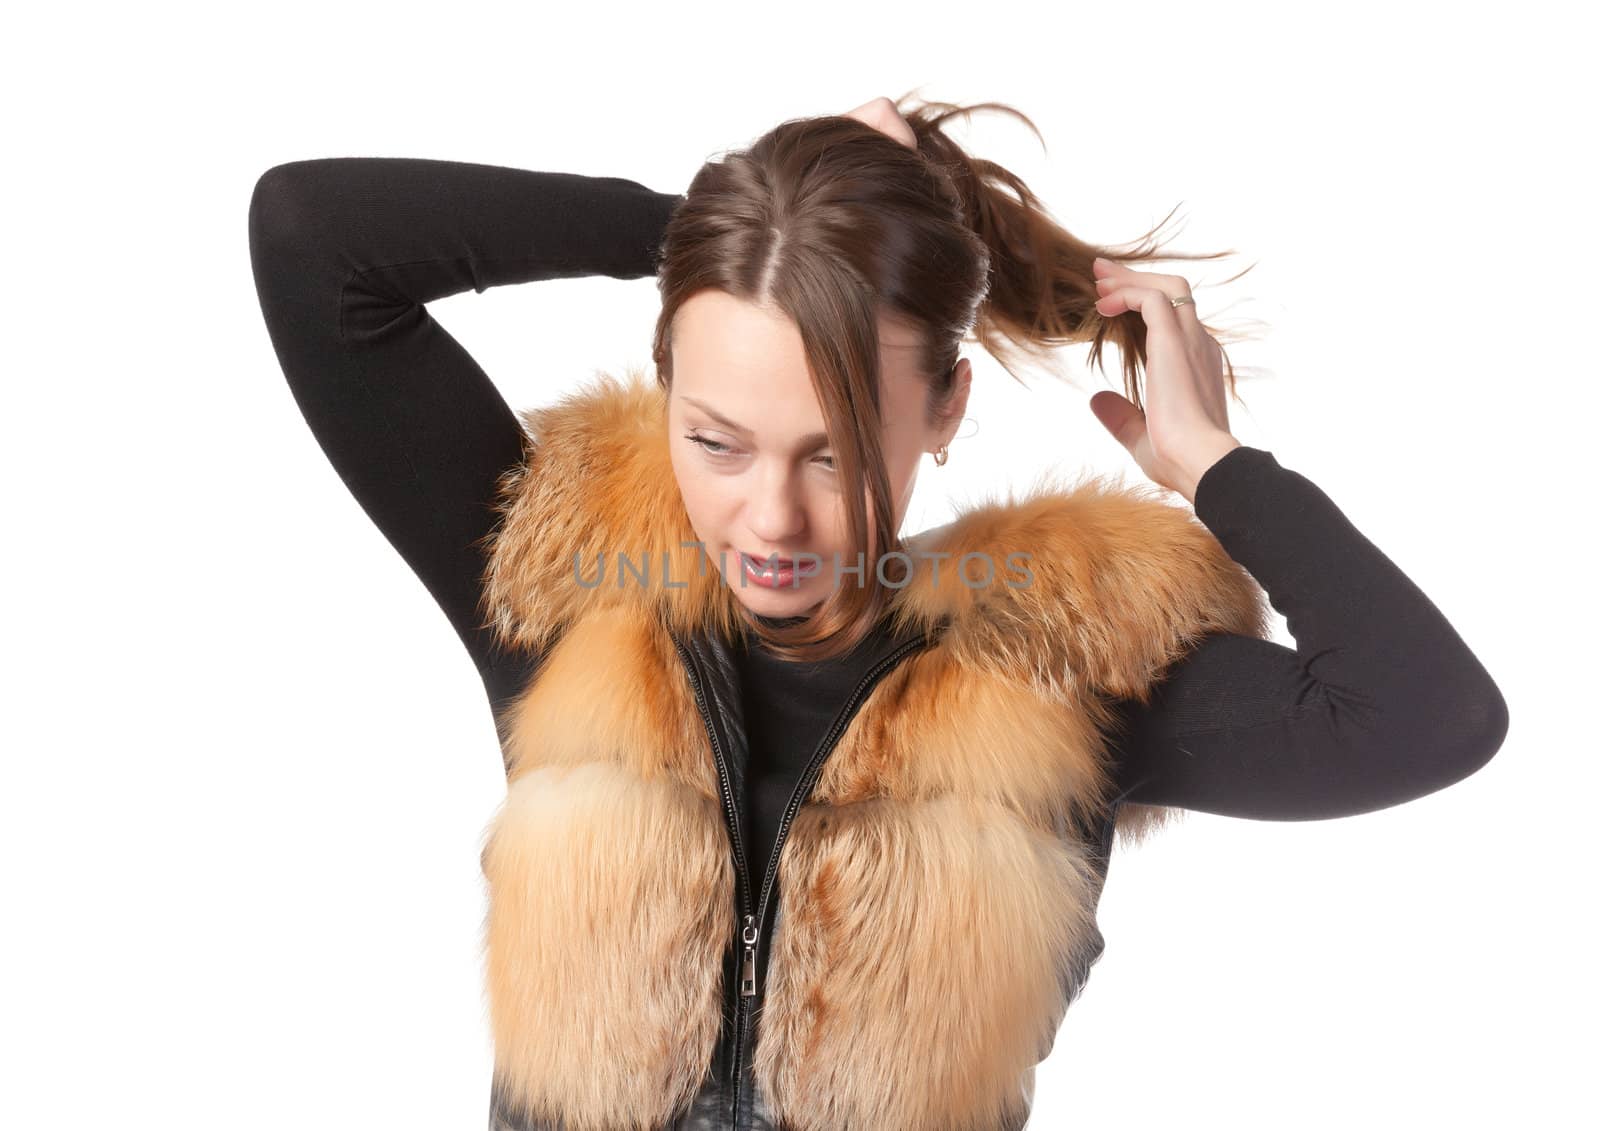 Stylish woman in winter fur jacket by Discovod